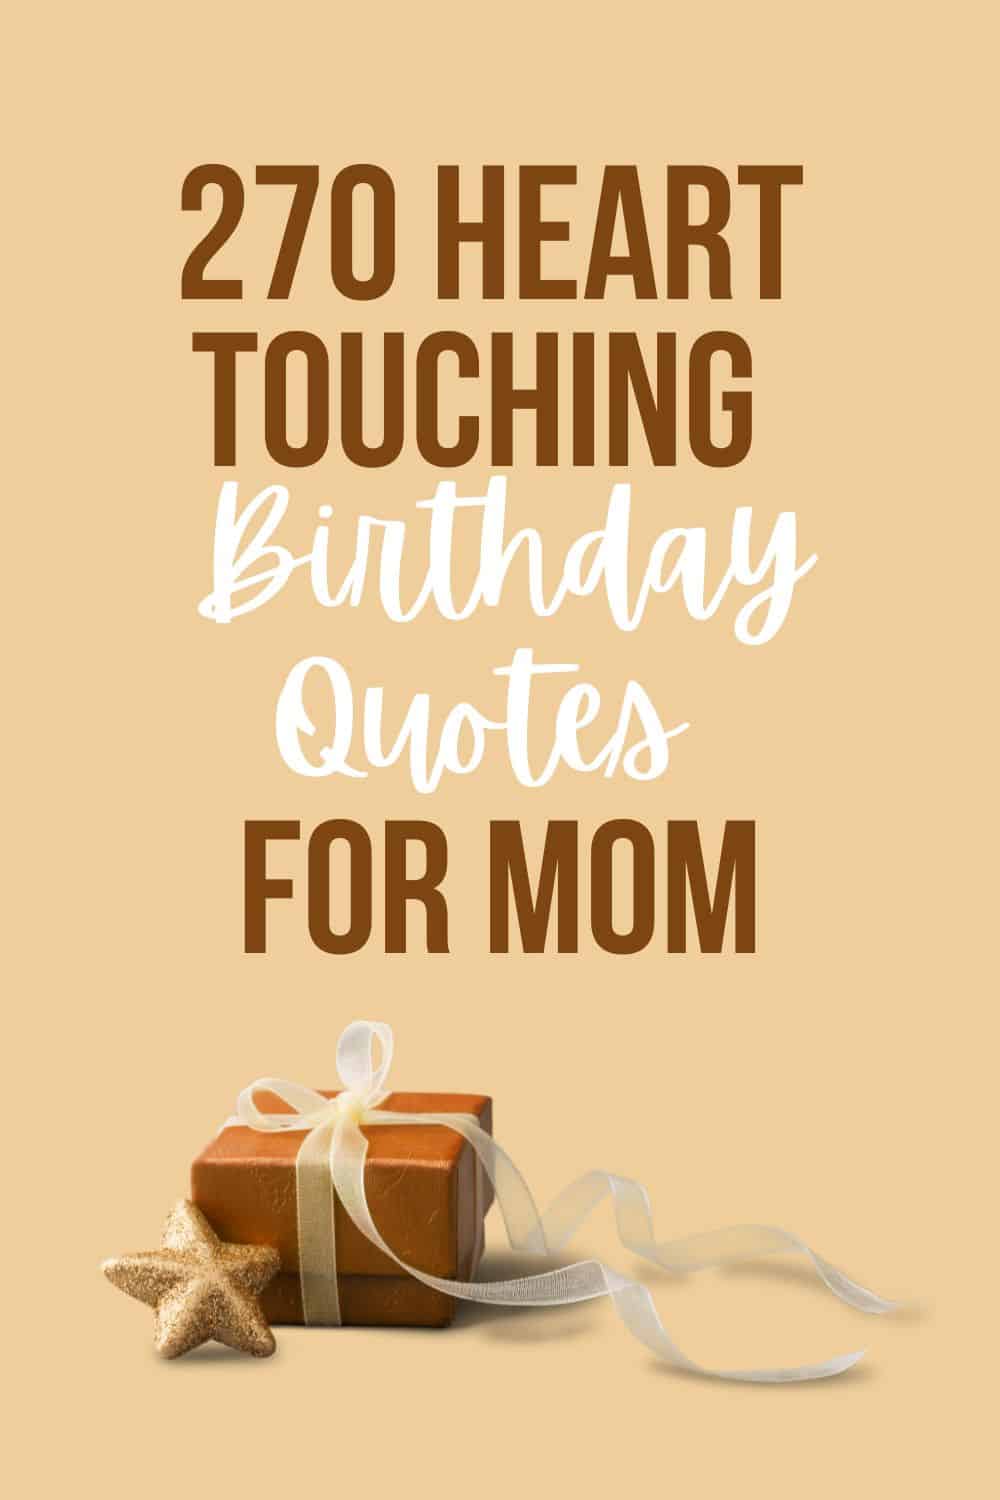 270 Beautiful And Heart Touching Birthday Quotes For Mom 